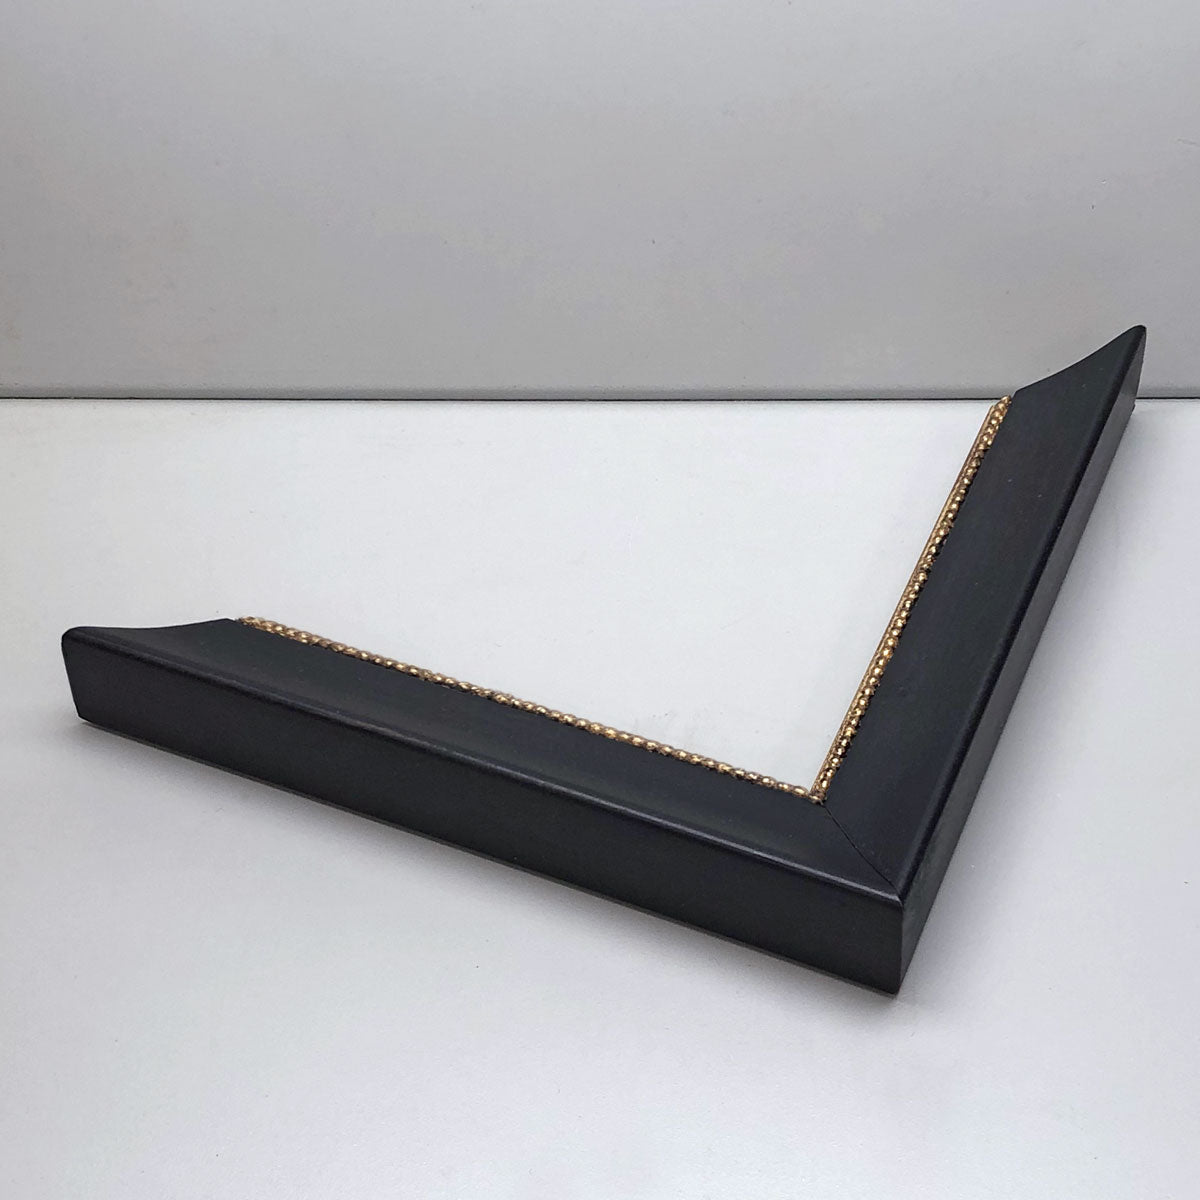 Aris - black frame with golden seeds ornament, pearl and gold layered mat